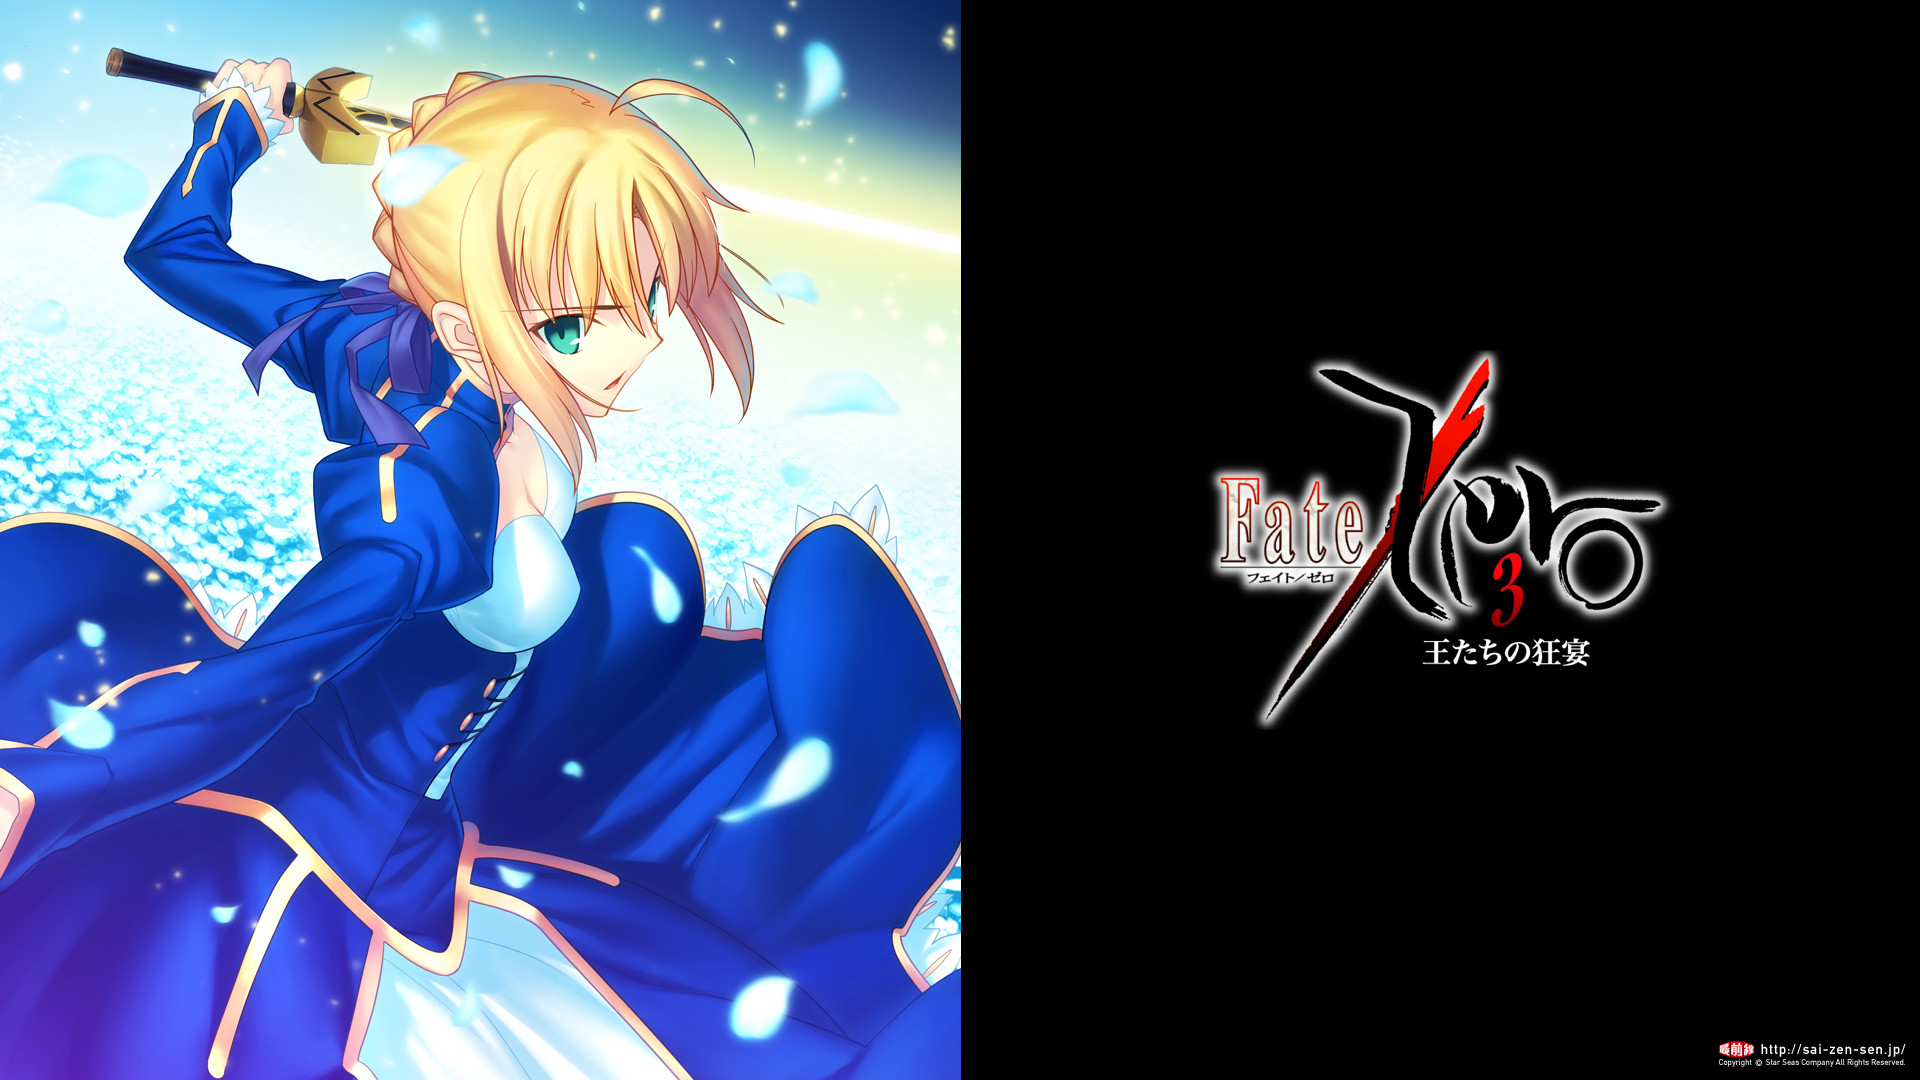 1920x1080 View Fullsize Saber (Fate/stay night) Image